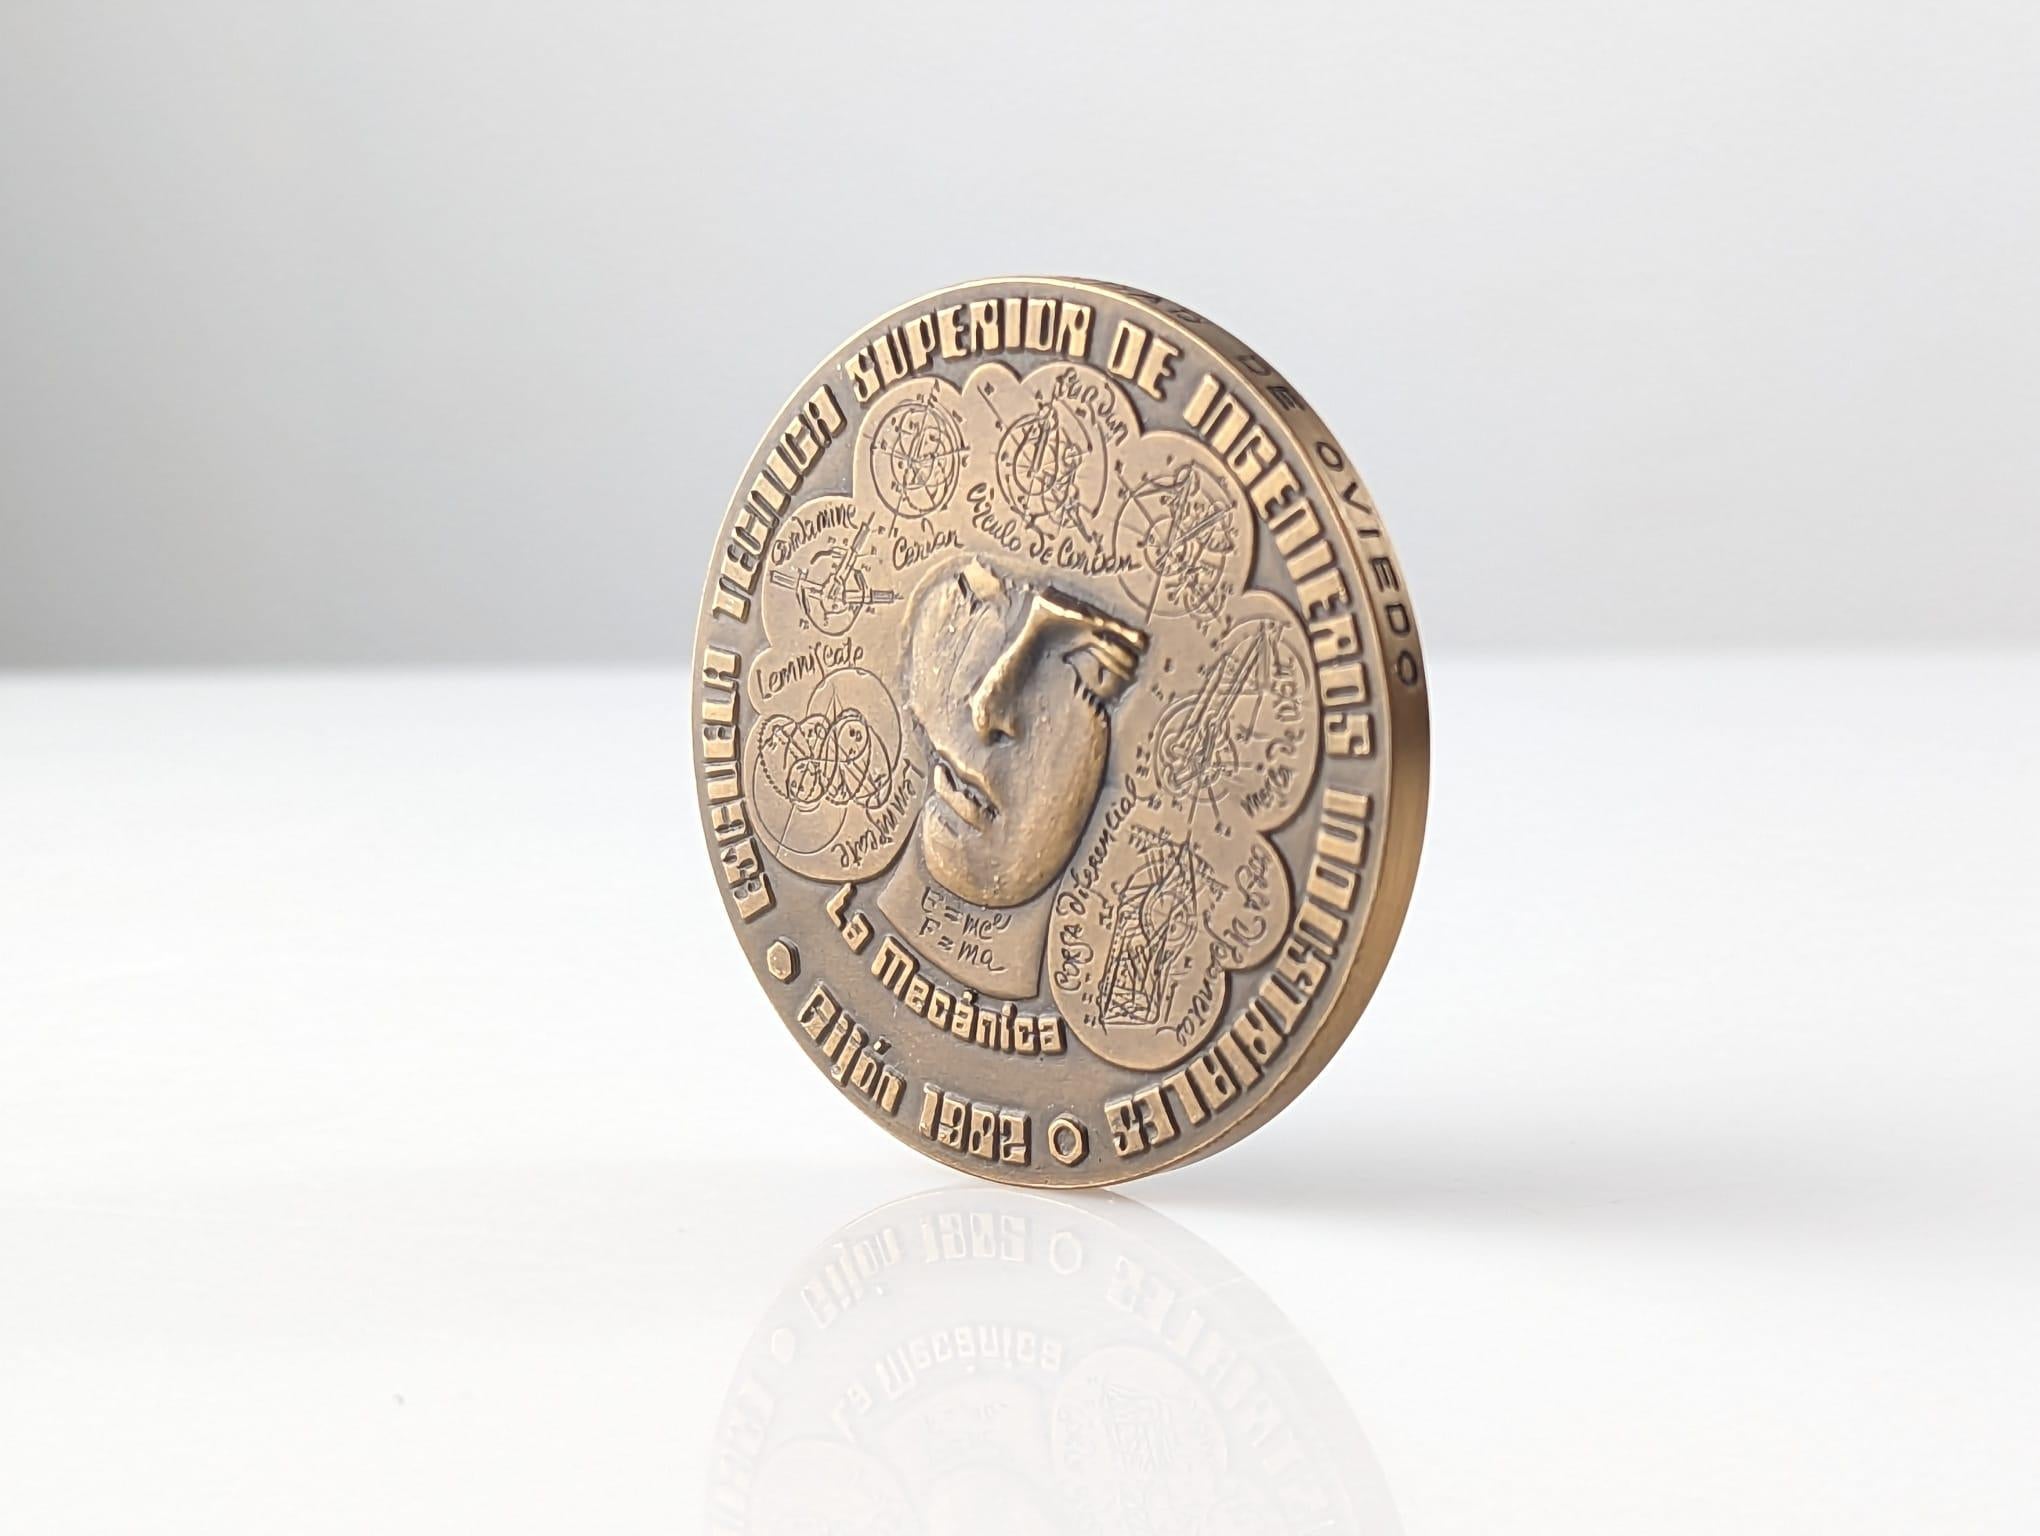 Bronze medal for Gijón made by Miguel Berrocal in 1982, a rare specimen that is difficult to obtain since its edition was made exclusively for the Higher Technical School of Industrial Engineers of Gijón.